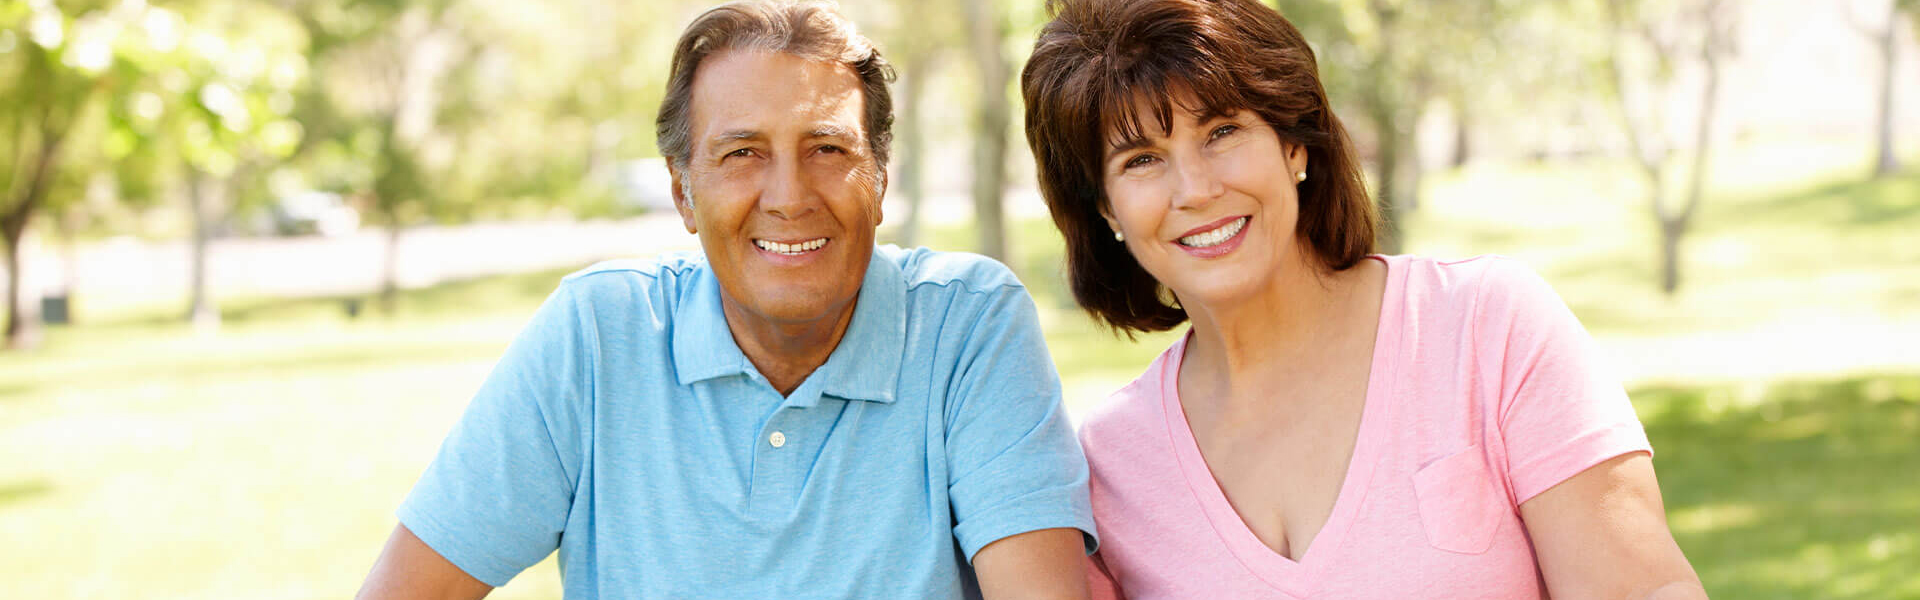 Healthy middle age couple